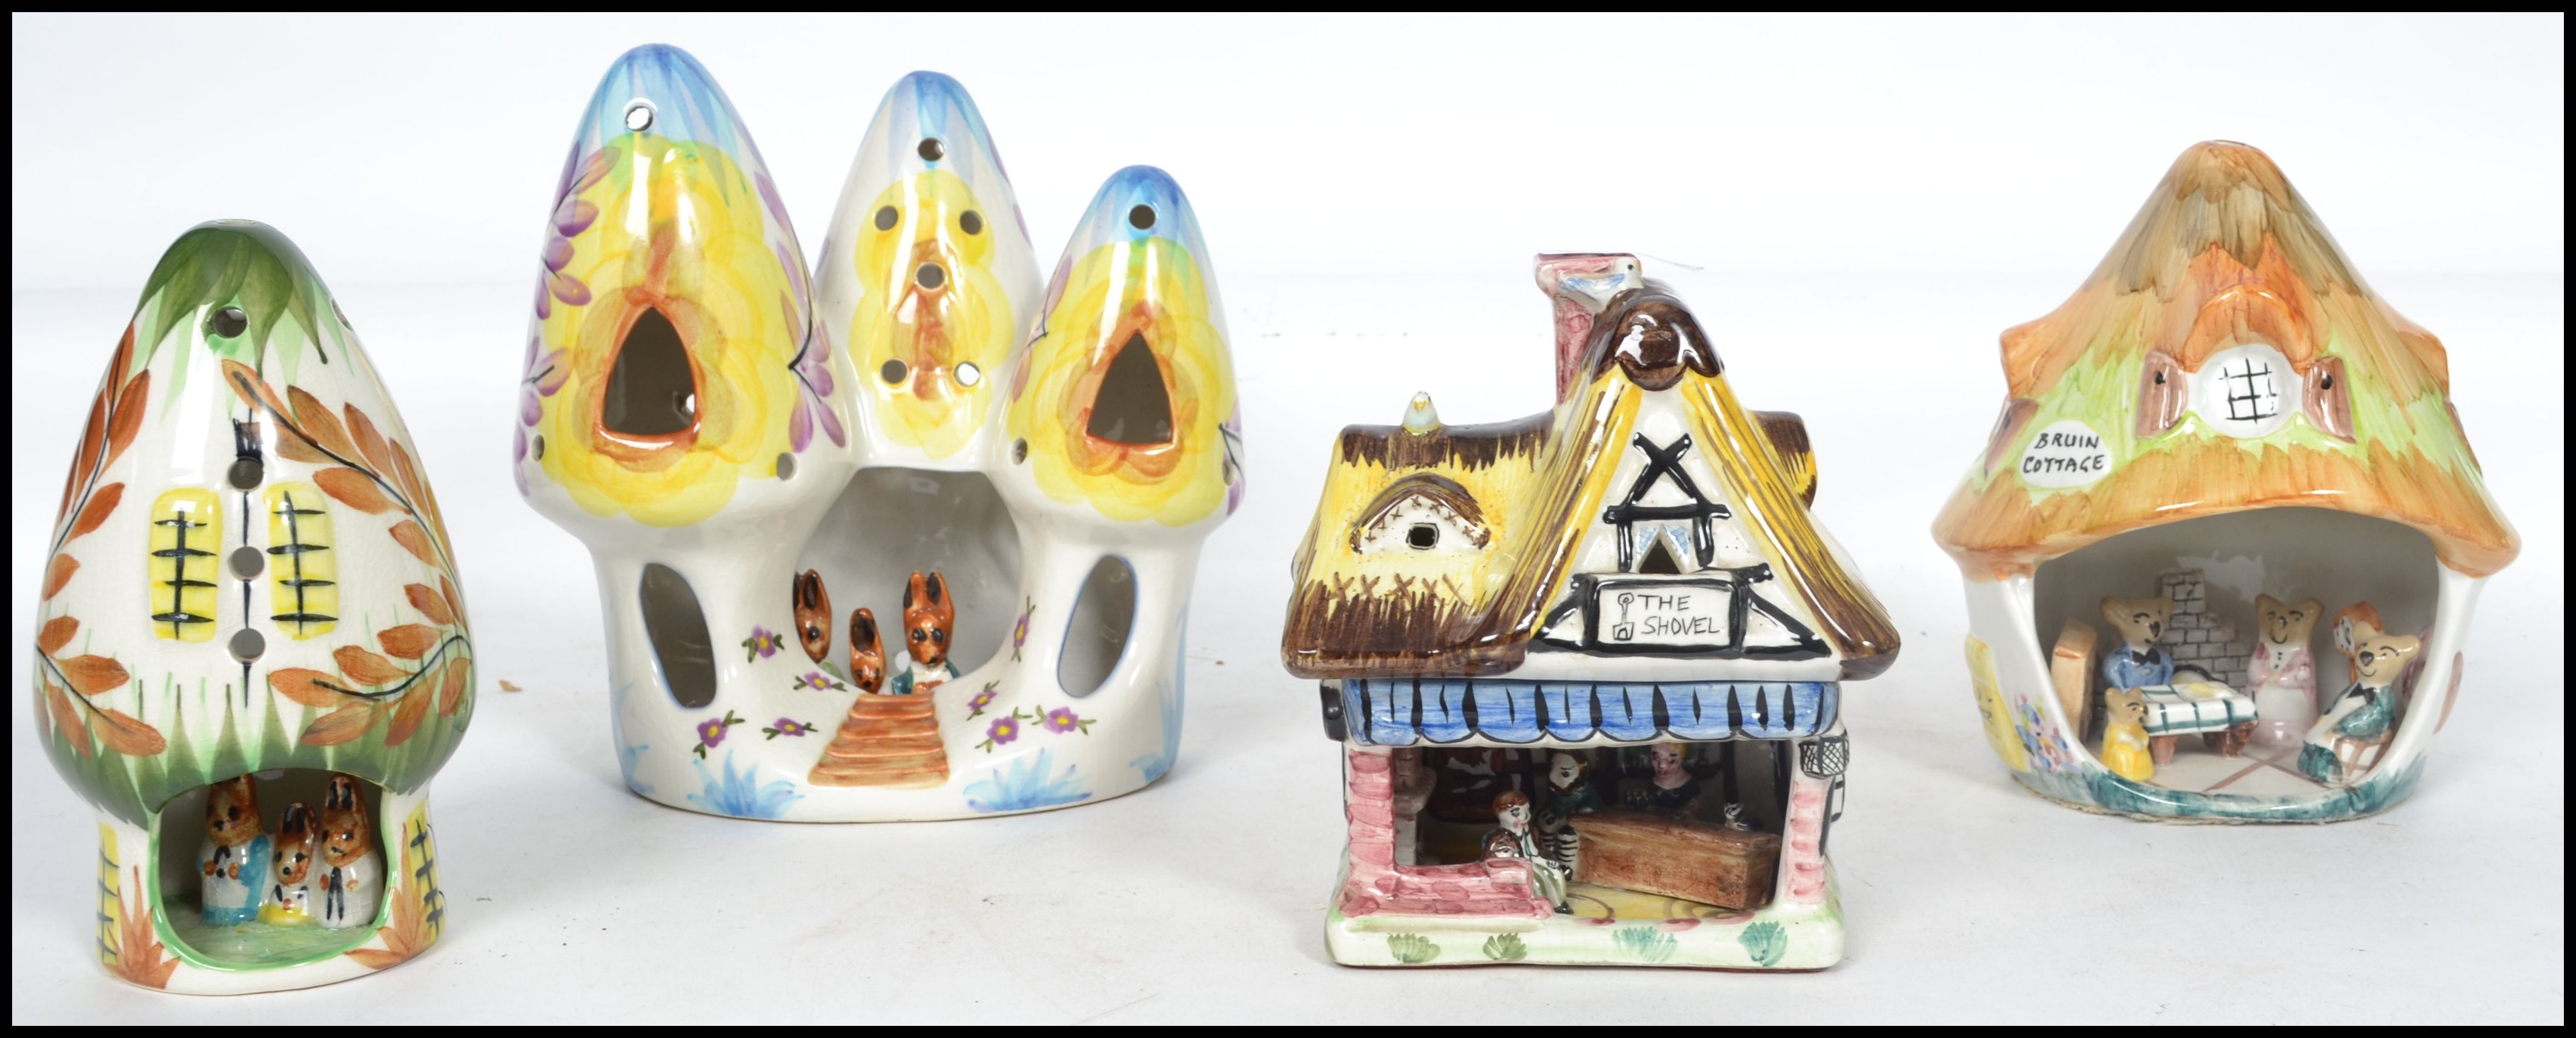 A group of three charming children's bedside night lights by Derrick Fowler together with a